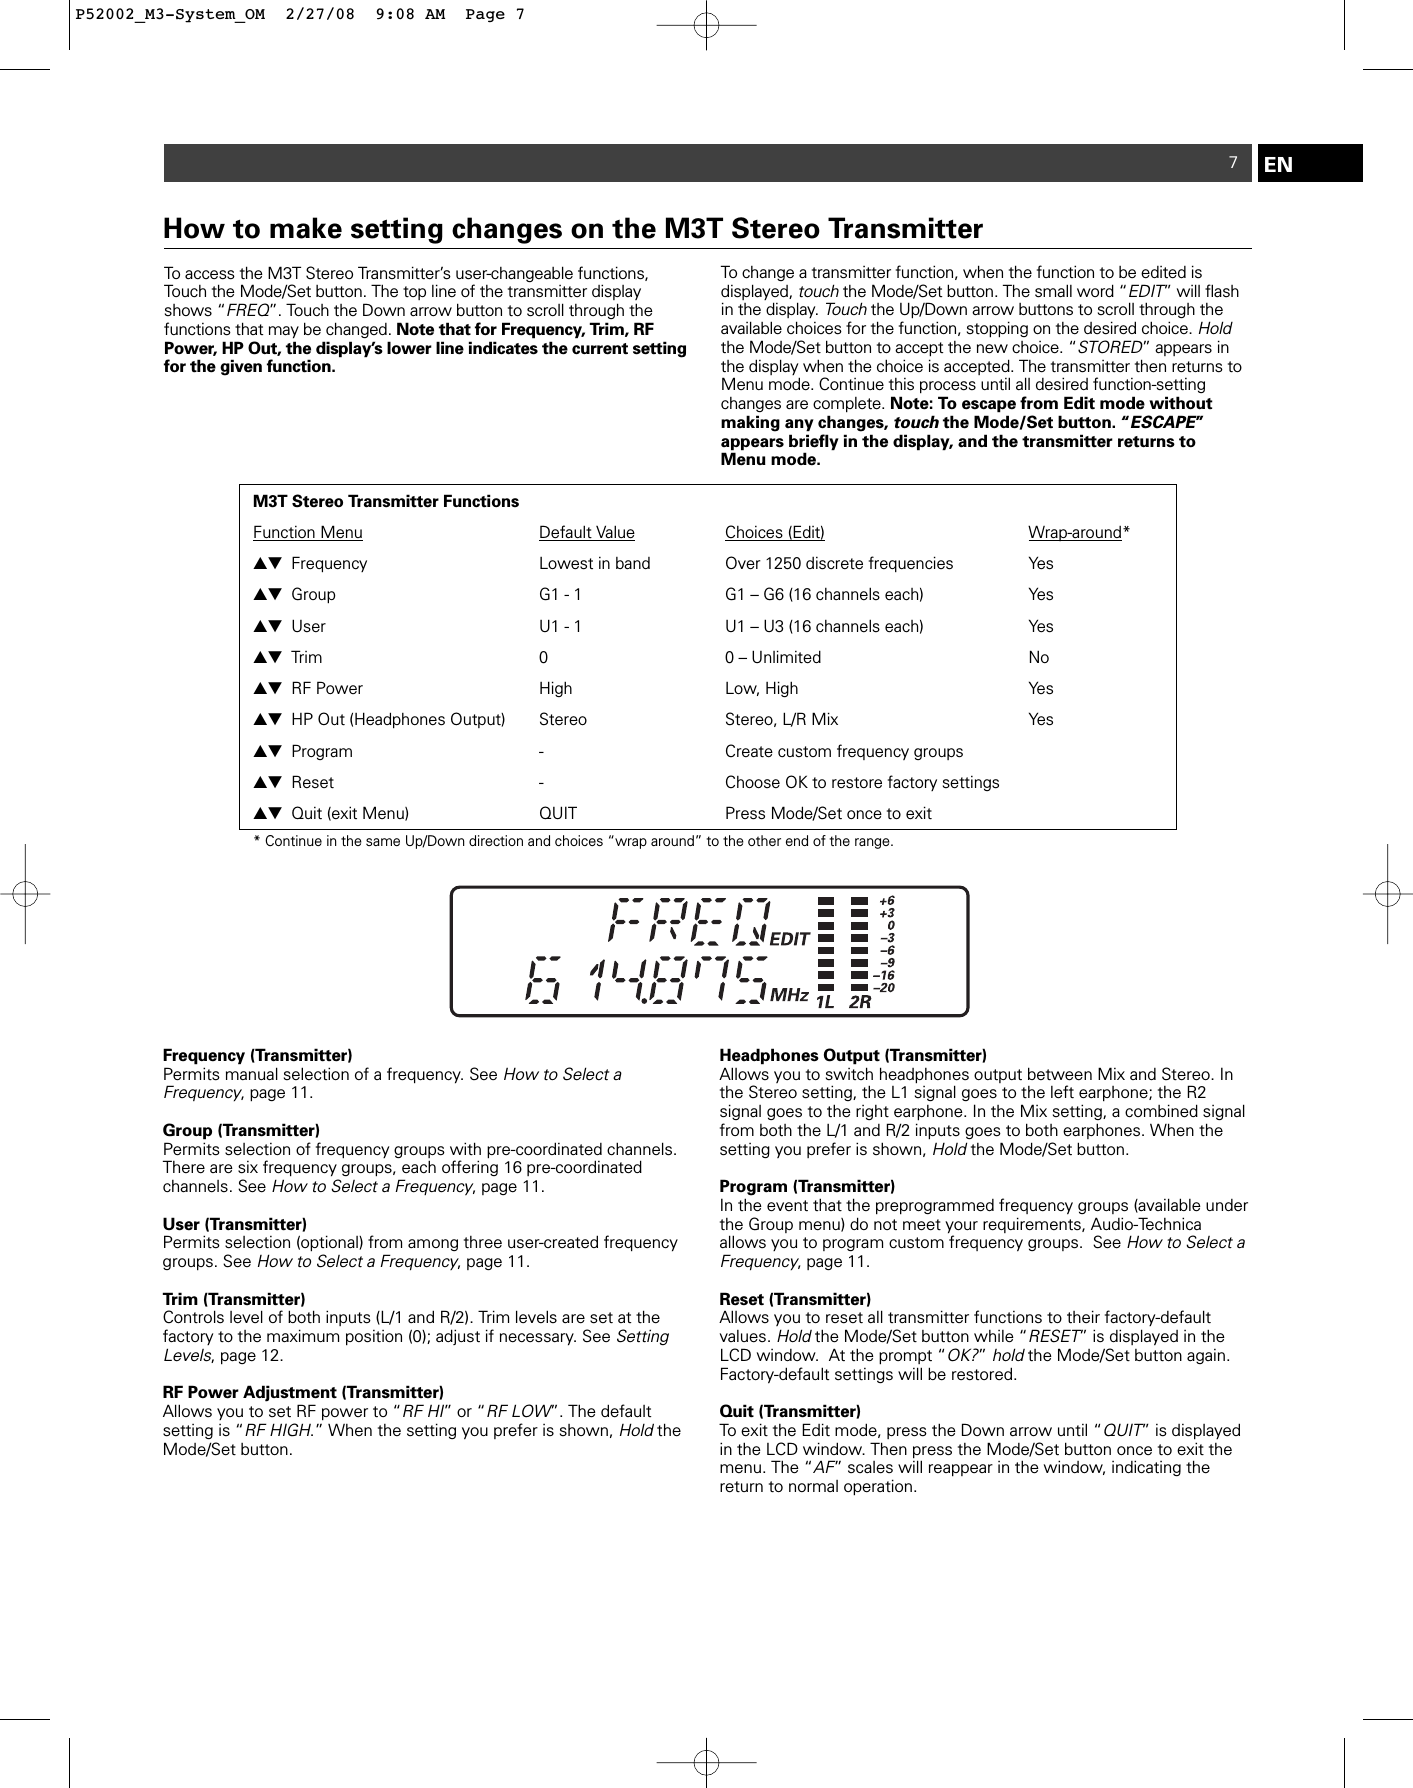 7To access the M3T Stereo Transmitter’s user-changeable functions,Touch the Mode/Set button. The top line of the transmitter displayshows “FREQ”. Touch the Down arrow button to scroll through thefunctions that may be changed. Note that for Frequency, Trim, RFPower, HP Out, the display’s lower line indicates the current settingfor the given function.To change a transmitter function, when the function to be edited is displayed, touchthe Mode/Set button. The small word “EDIT” will flashin the display. Touchthe Up/Down arrow buttons to scroll through theavailable choices for the function, stopping on the desired choice. Holdthe Mode/Set button to accept the new choice. “STORED” appears inthe display when the choice is accepted. The transmitter then returns toMenu mode. Continue this process until all desired function-settingchanges are complete. Note: To escape from Edit mode without making any changes, touchthe Mode/Set button. “ESCAPE” appears briefly in the display, and the transmitter returns to Menu mode.ENHow to make setting changes on the M3T Stereo TransmitterM3T Stereo Transmitter FunctionsFunction Menu Default Value Choices (Edit) Wrap-around*▲▼ Frequency Lowest in band Over 1250 discrete frequencies  Yes▲▼ Group G1 - 1 G1 – G6 (16 channels each)  Yes▲▼ User U1 - 1 U1 – U3 (16 channels each)   Yes▲▼ Trim 0   0 – Unlimited No▲▼ RF Power High   Low, High Yes▲▼ HP Out (Headphones Output) Stereo Stereo, L/R Mix Yes▲▼ Program -  Create custom frequency groups ▲▼ Reset - Choose OK to restore factory settings▲▼ Quit (exit Menu)  QUIT  Press Mode/Set once to exit  * Continue in the same Up/Down direction and choices “wrap around” to the other end of the range.Frequency (Transmitter)Permits manual selection of a frequency. See How to Select a Frequency, page 11. Group (Transmitter)Permits selection of frequency groups with pre-coordinated channels.There are six frequency groups, each offering 16 pre-coordinated channels. See How to Select a Frequency, page 11. User (Transmitter)Permits selection (optional) from among three user-created frequencygroups. See How to Select a Frequency, page 11. Trim (Transmitter)Controls level of both inputs (L/1 and R/2). Trim levels are set at thefactory to the maximum position (0); adjust if necessary. See SettingLevels, page 12. RF Power Adjustment (Transmitter)Allows you to set RF power to “RF HI” or “RF LOW”. The default setting is “RF HIGH.” When the setting you prefer is shown, HoldtheMode/Set button.Headphones Output (Transmitter) Allows you to switch headphones output between Mix and Stereo. Inthe Stereo setting, the L1 signal goes to the left earphone; the R2 signal goes to the right earphone. In the Mix setting, a combined signalfrom both the L/1 and R/2 inputs goes to both earphones. When thesetting you prefer is shown, Holdthe Mode/Set button.Program (Transmitter)In the event that the preprogrammed frequency groups (available underthe Group menu) do not meet your requirements, Audio-Technica allows you to program custom frequency groups.  See How to Select aFrequency, page 11. Reset (Transmitter)Allows you to reset all transmitter functions to their factory-default values. Holdthe Mode/Set button while “RESET” is displayed in theLCD window.  At the prompt “OK?” holdthe Mode/Set button again.Factory-default settings will be restored.  Quit (Transmitter)To exit the Edit mode, press the Down arrow until “QUIT” is displayedin the LCD window. Then press the Mode/Set button once to exit themenu. The “AF” scales will reappear in the window, indicating the return to normal operation.P52002_M3-System_OM  2/27/08  9:08 AM  Page 7